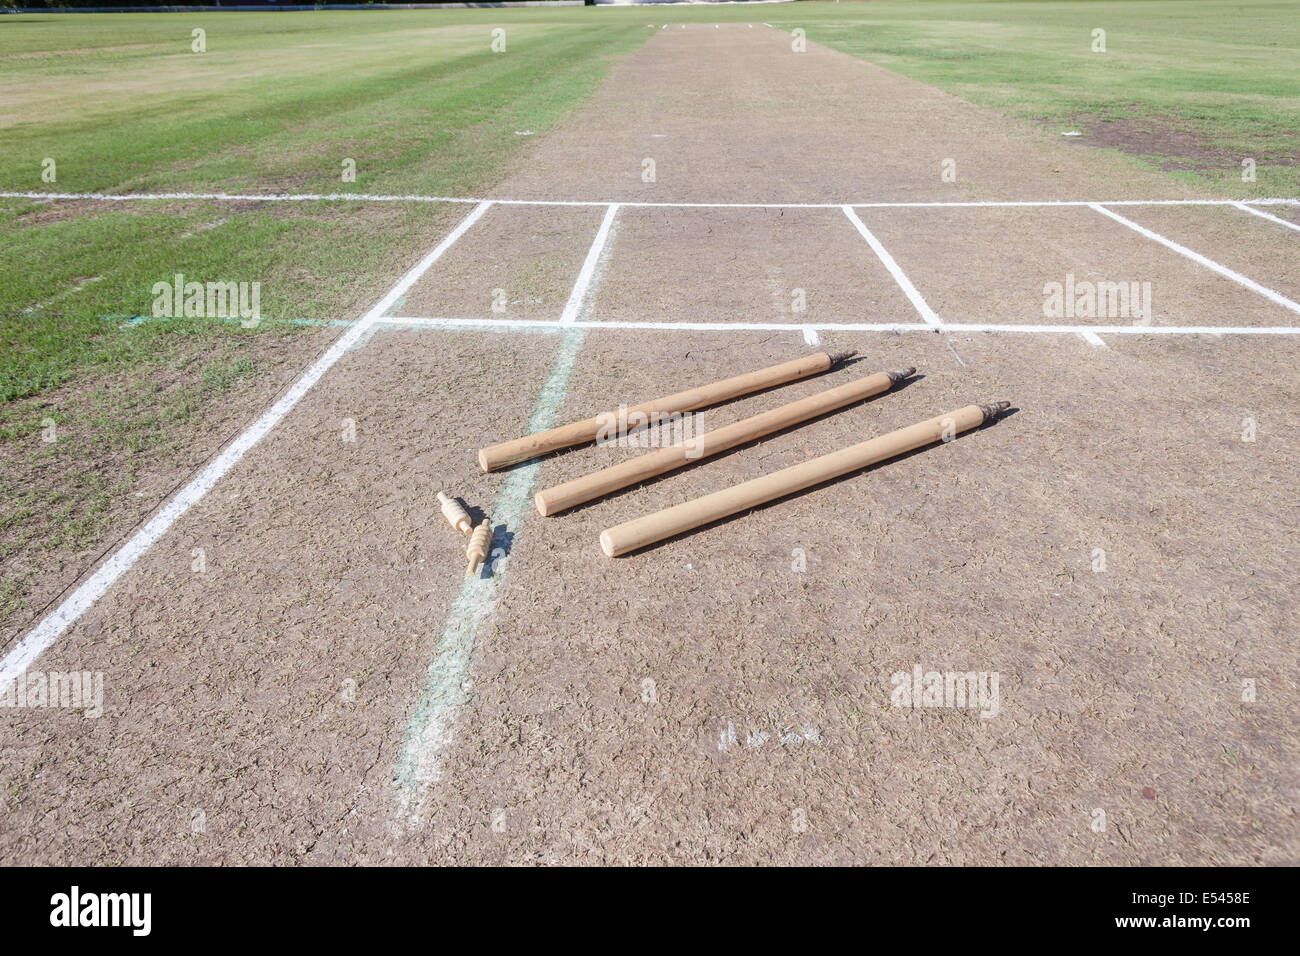 Cricket Pitch surface field wooden wickets and bails ready for game Stock Photo